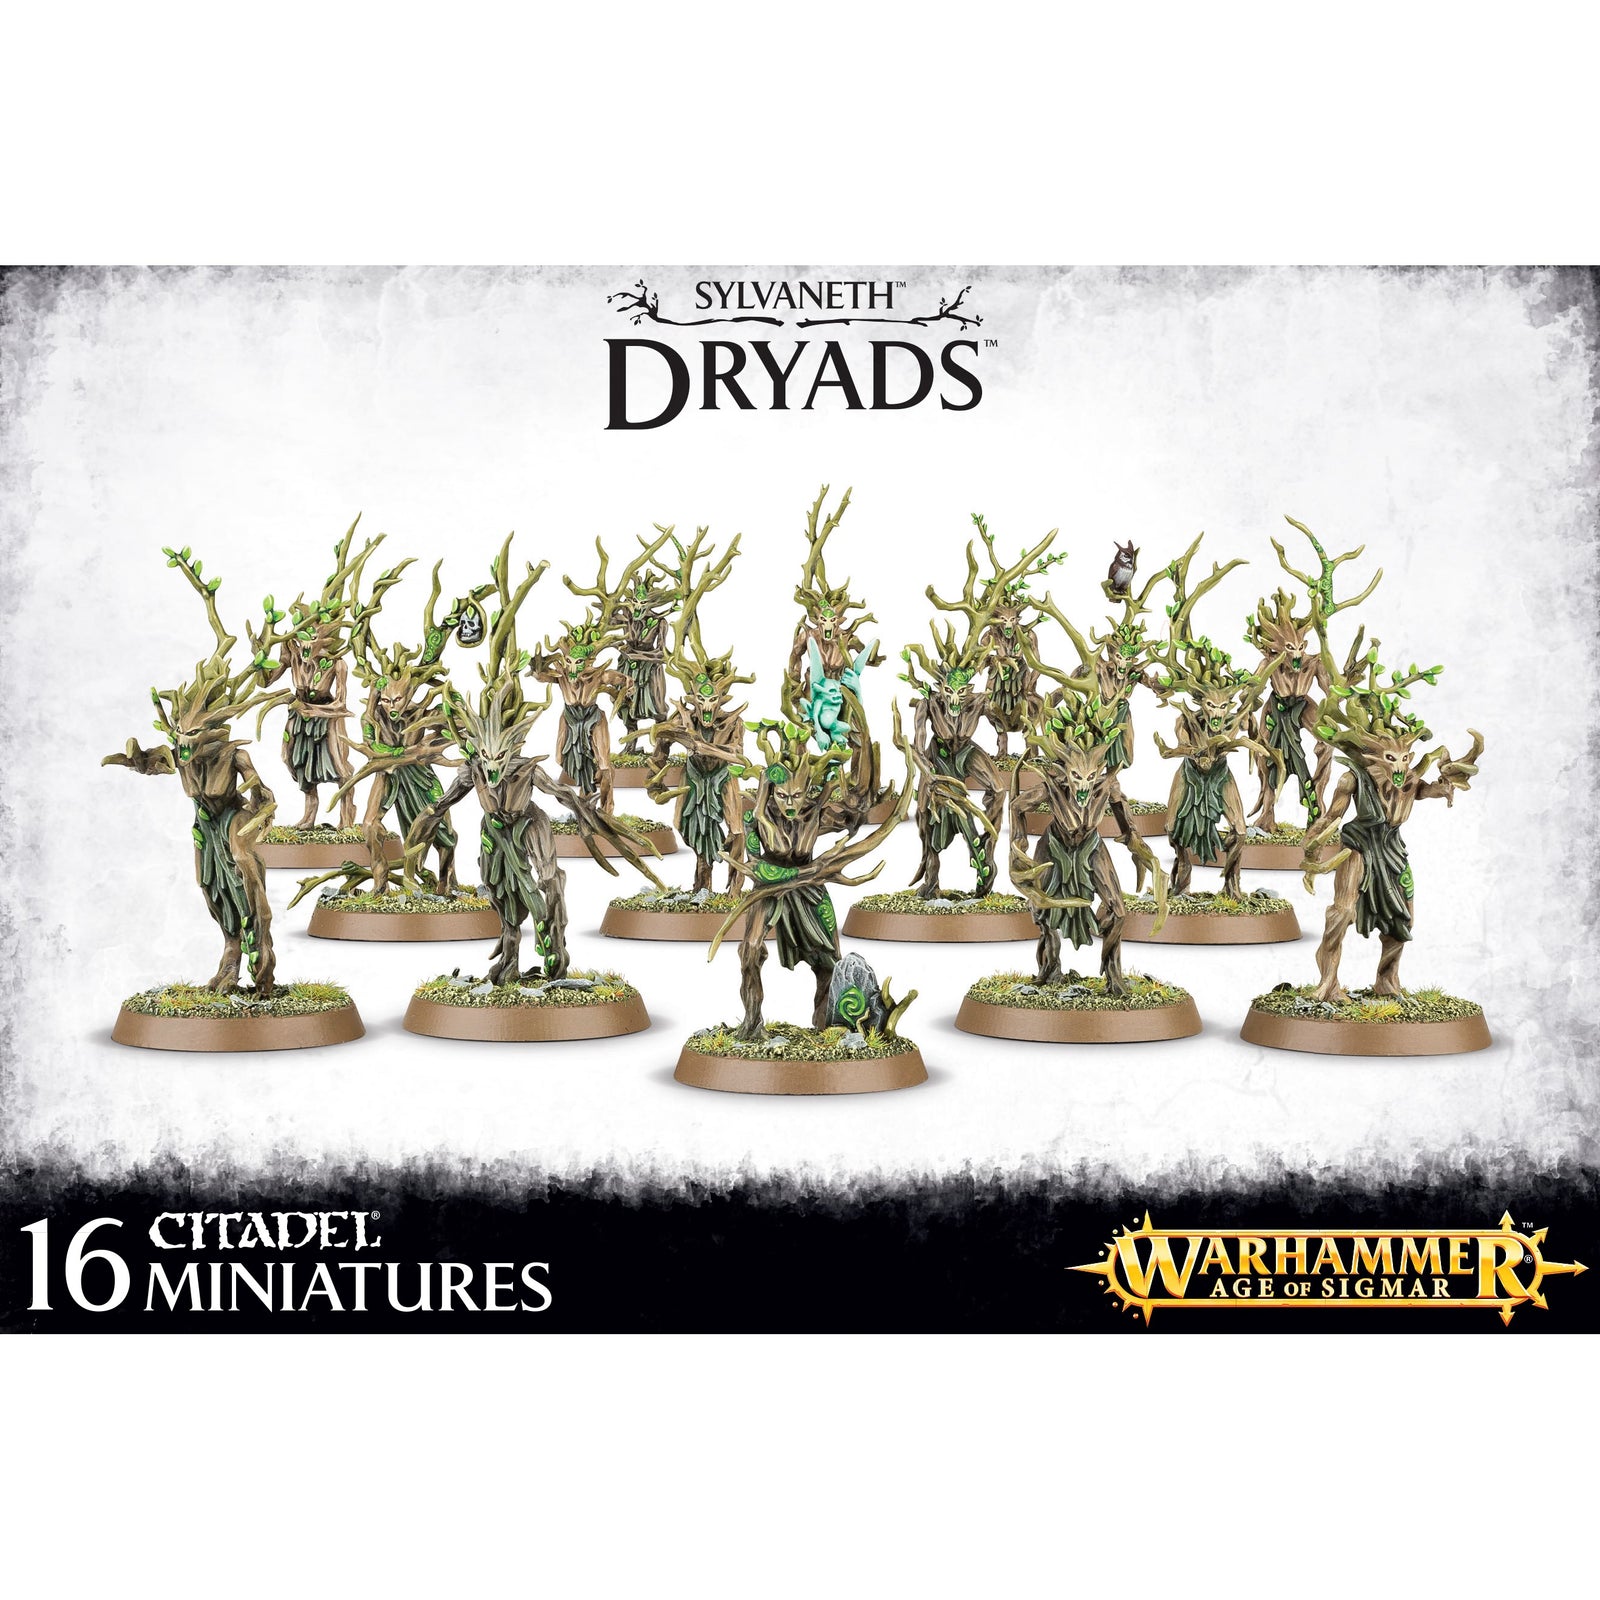 Box image for dryads